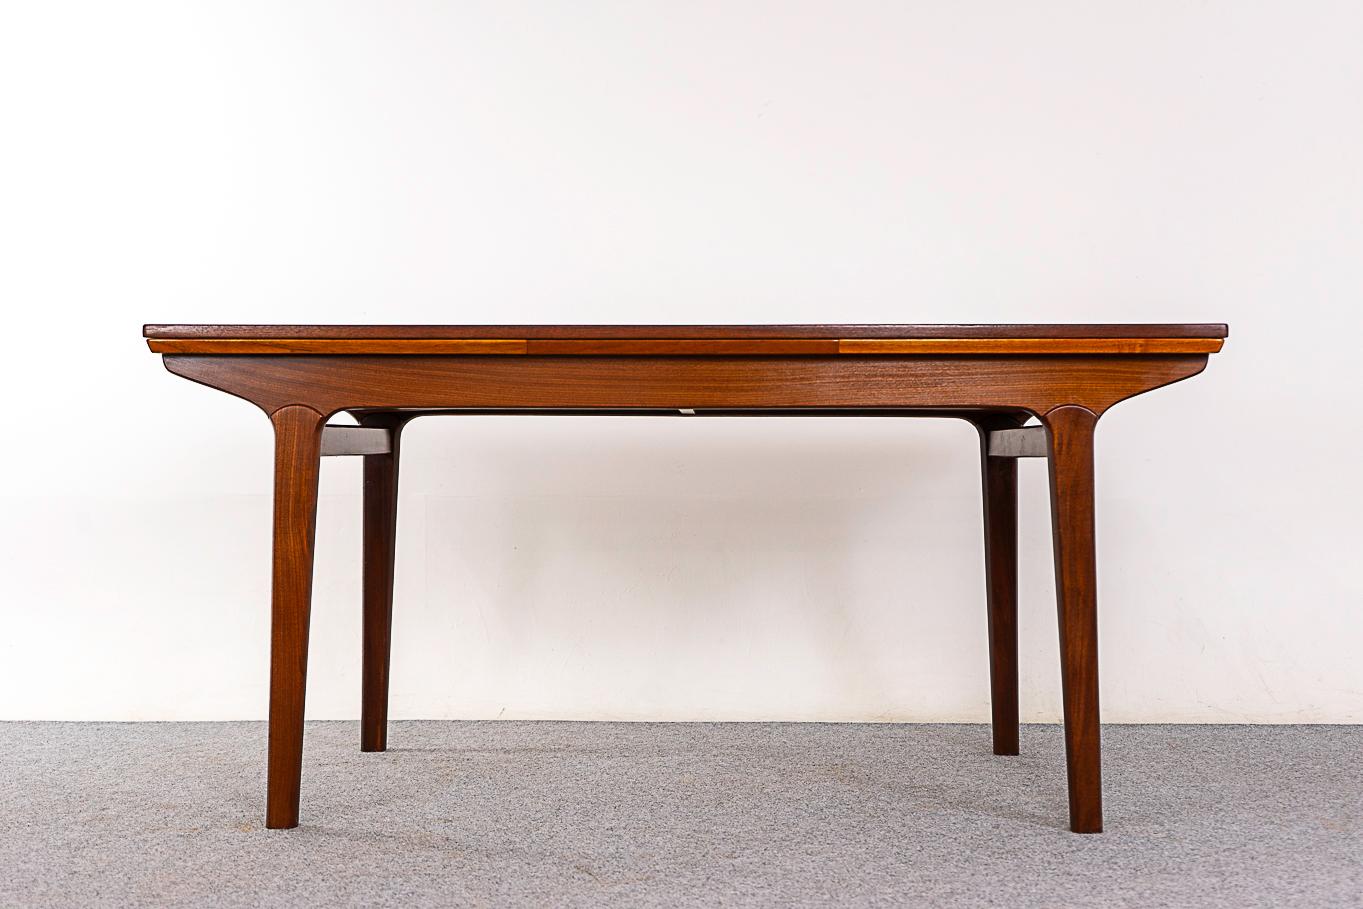 Teak dining table by Johannes Andersen, circa 1960's. Top is framed in solid wood edge trim, center panels feature highly figured veneer with book-matched grain. Self-storing leaves slide out from each end, extending the table surface by nearly two